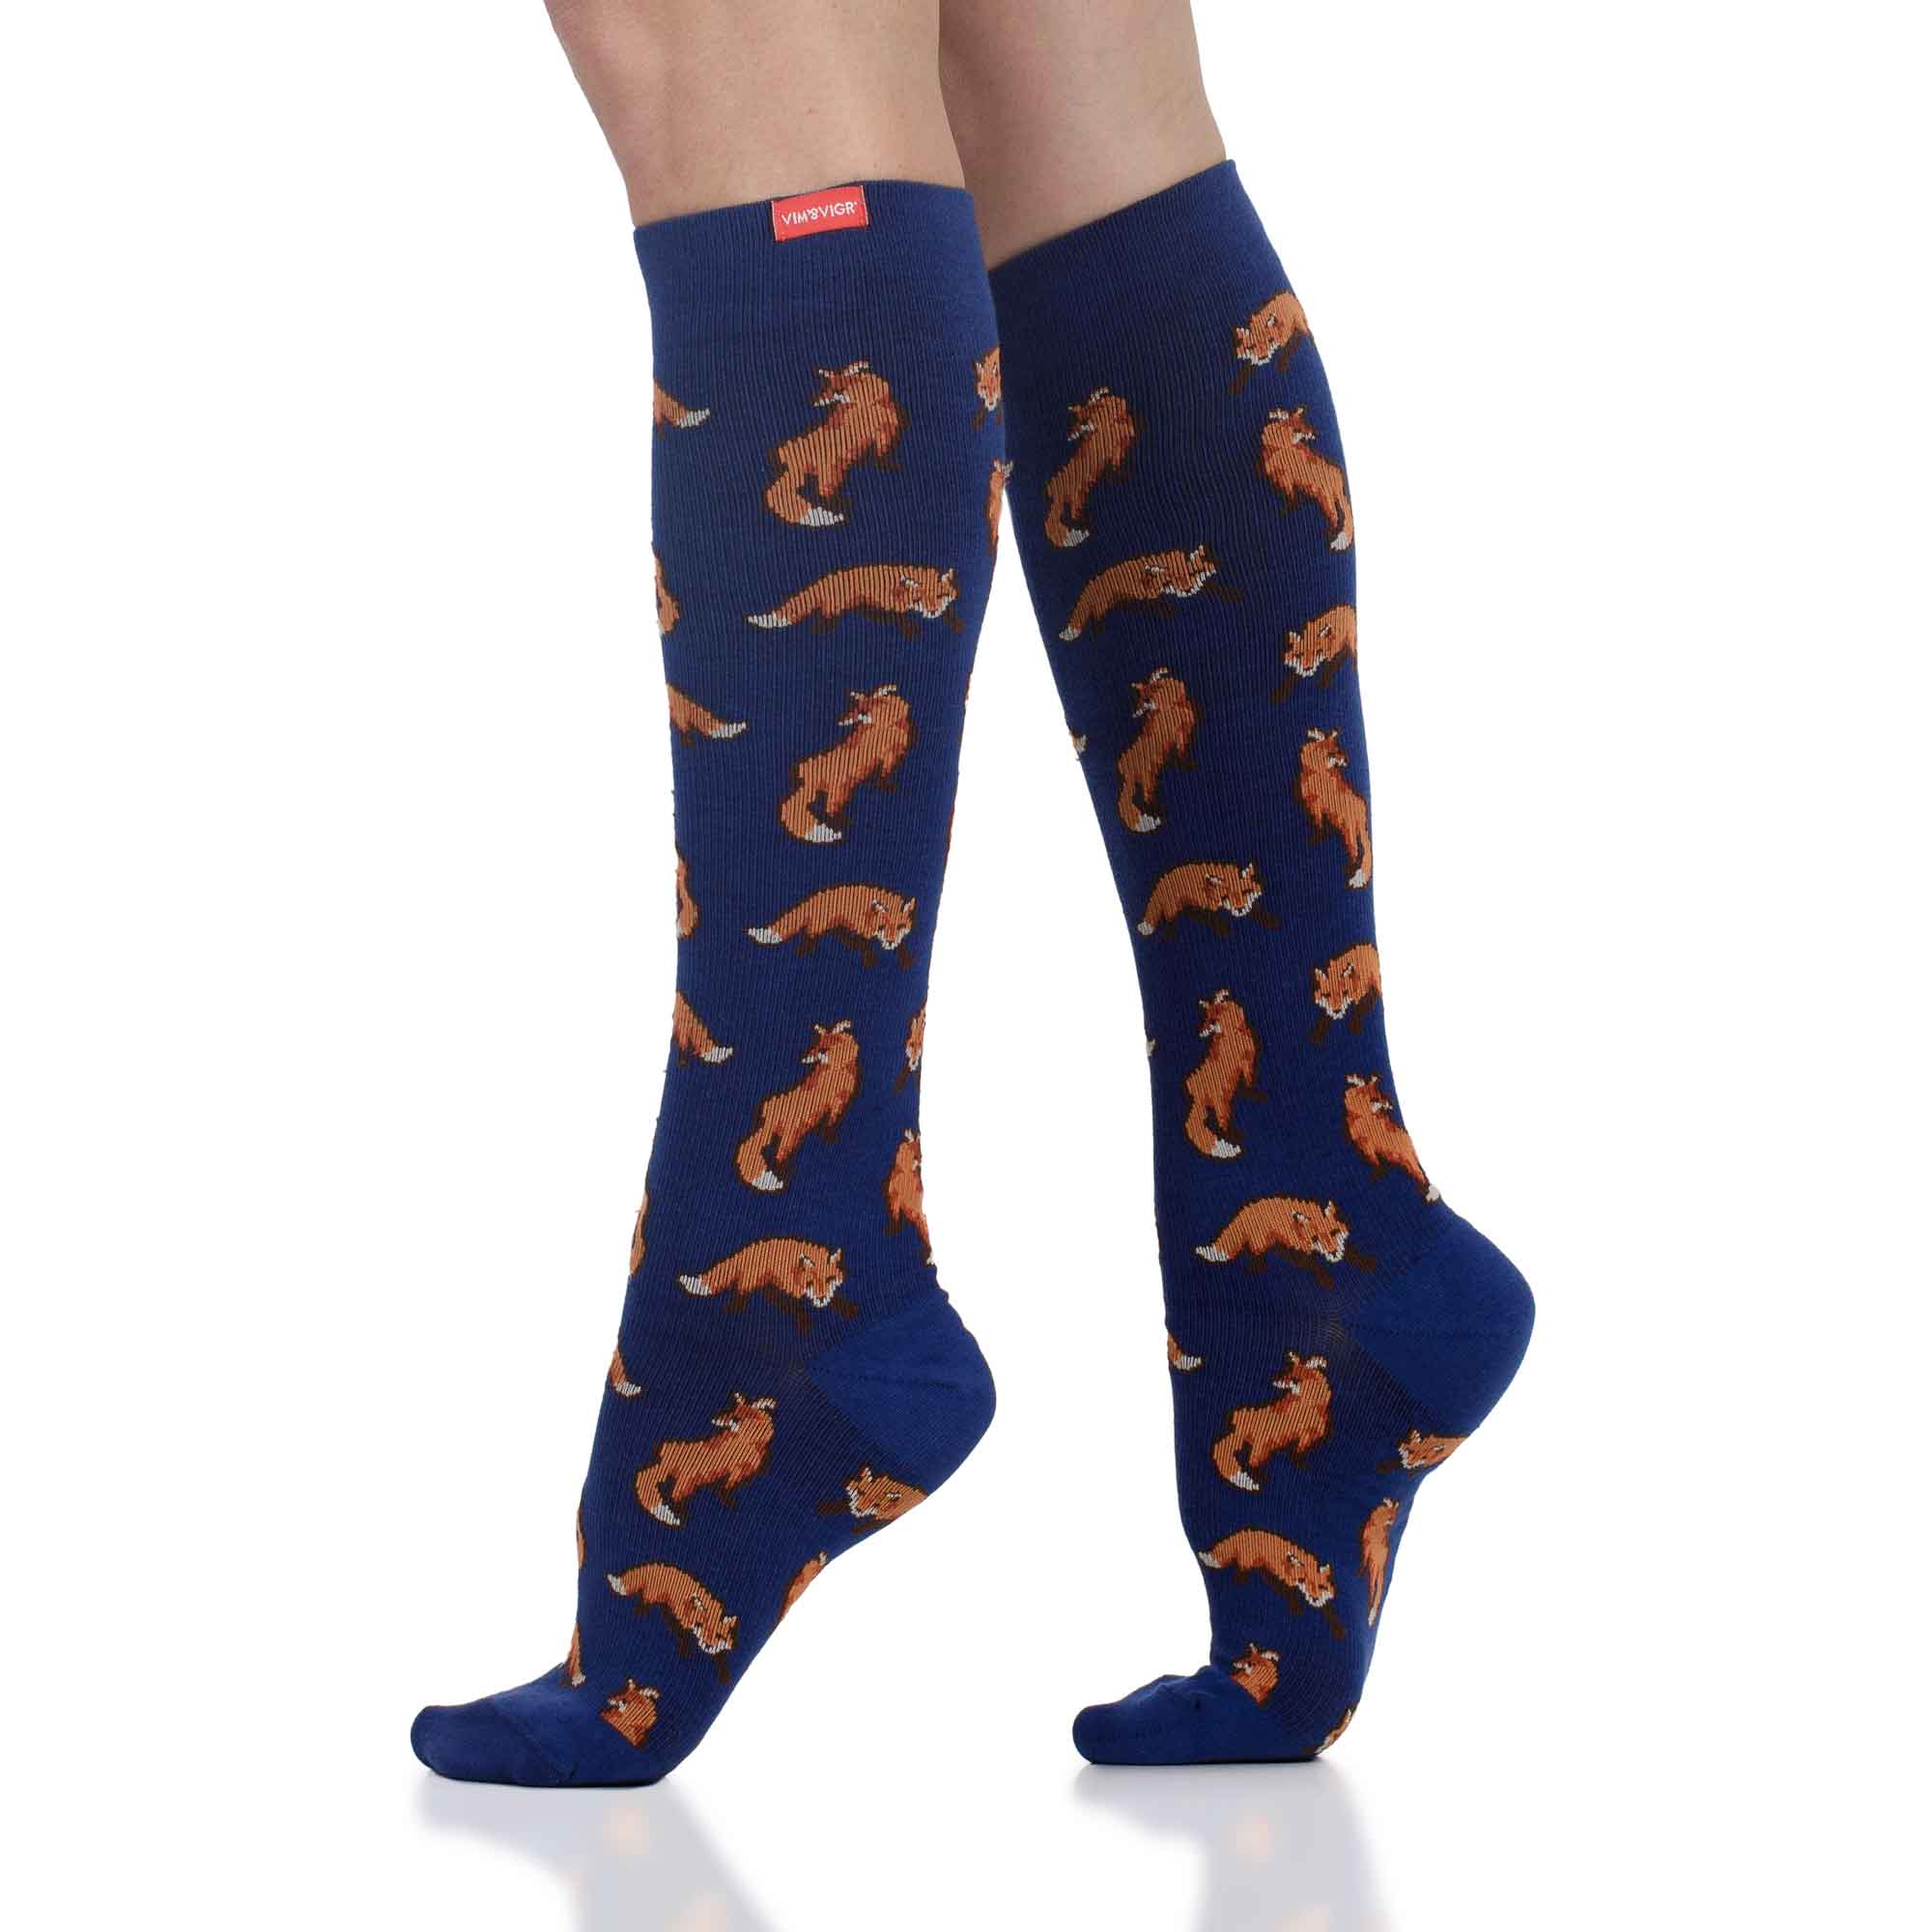 Cotton 15-20 mmHg Knee High in Foxes Pattern